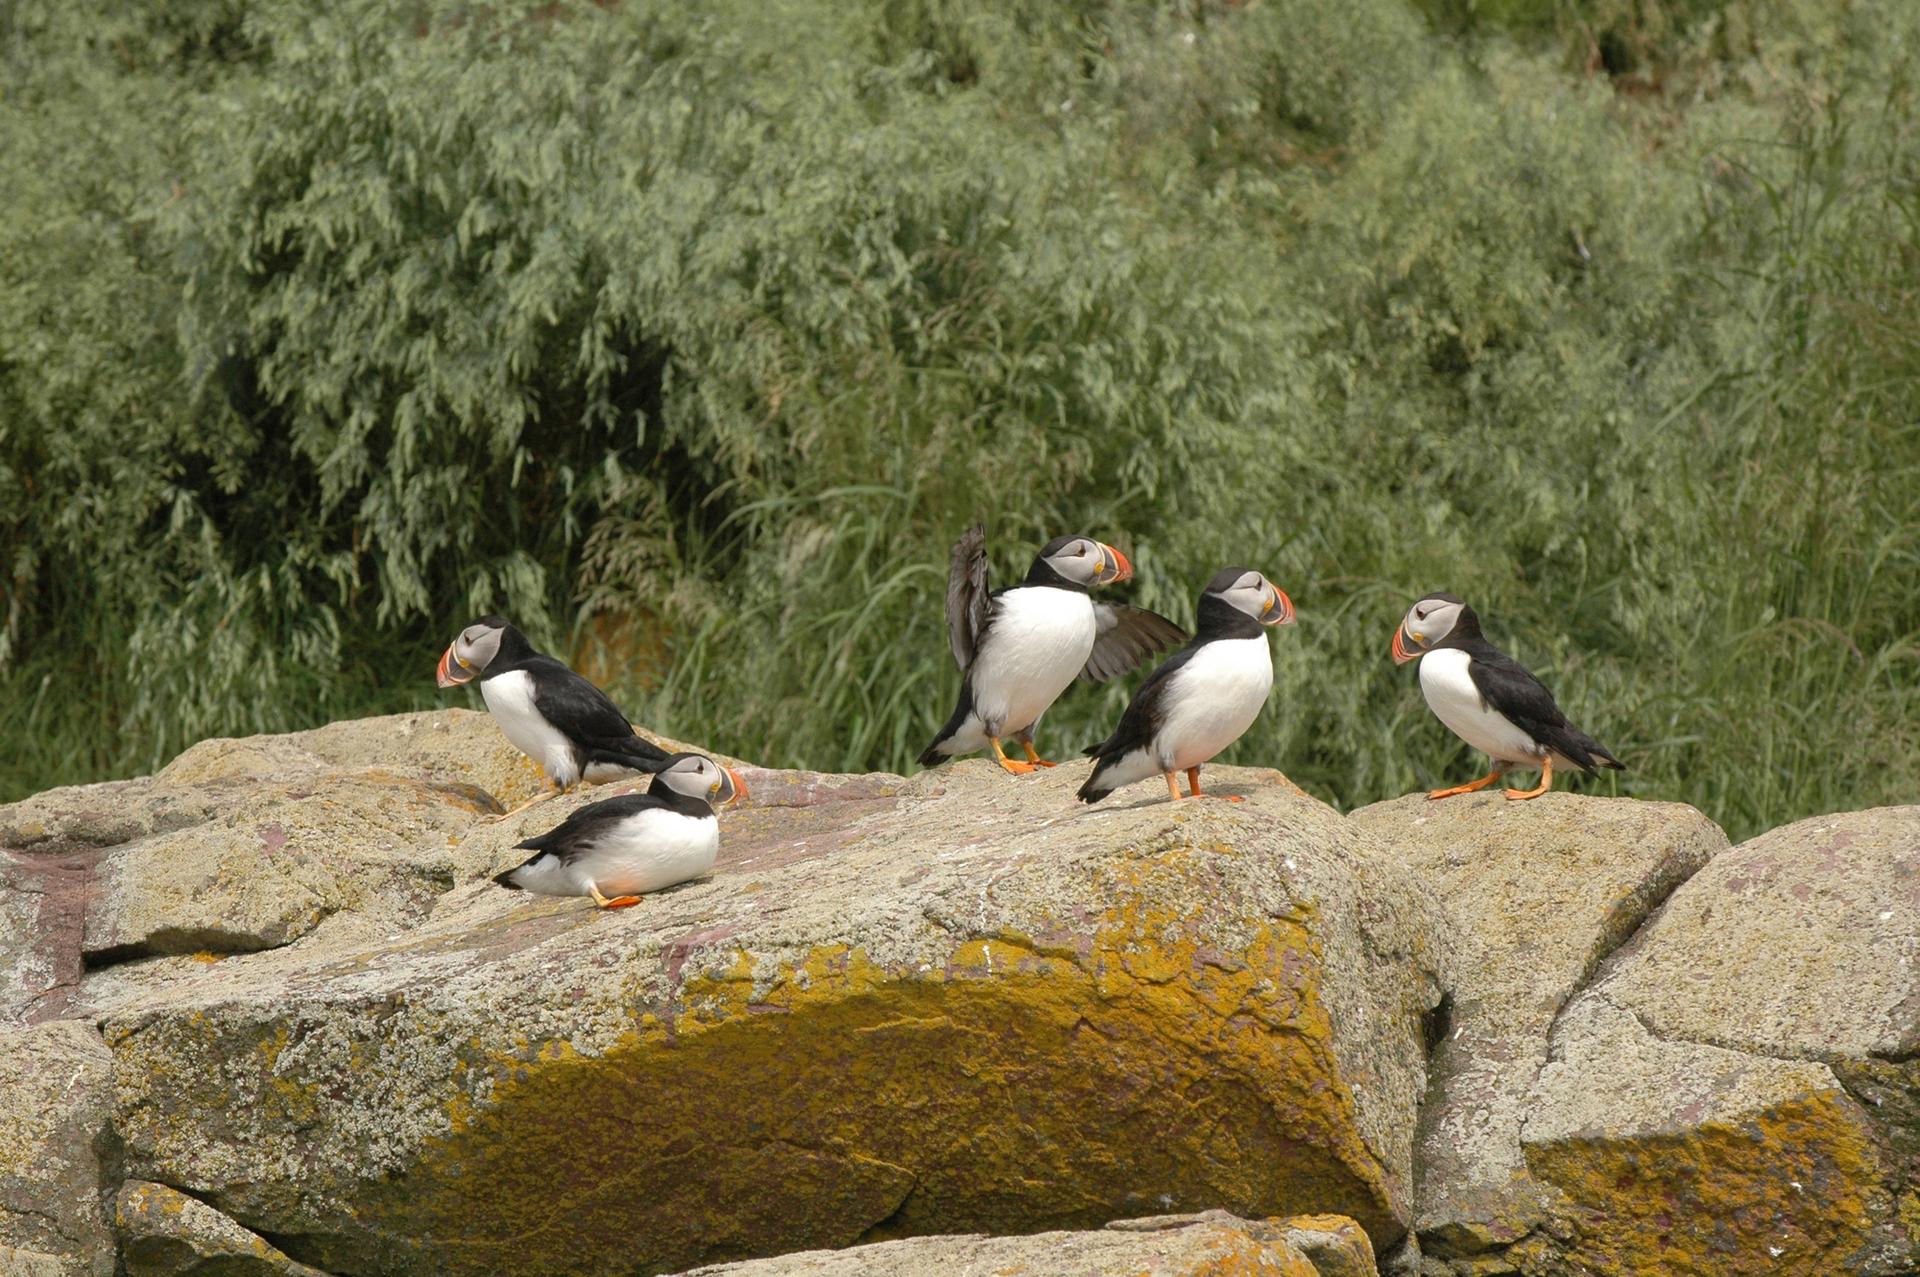 Gatherall’s Puffin and Whale Watch in Bay Bulls